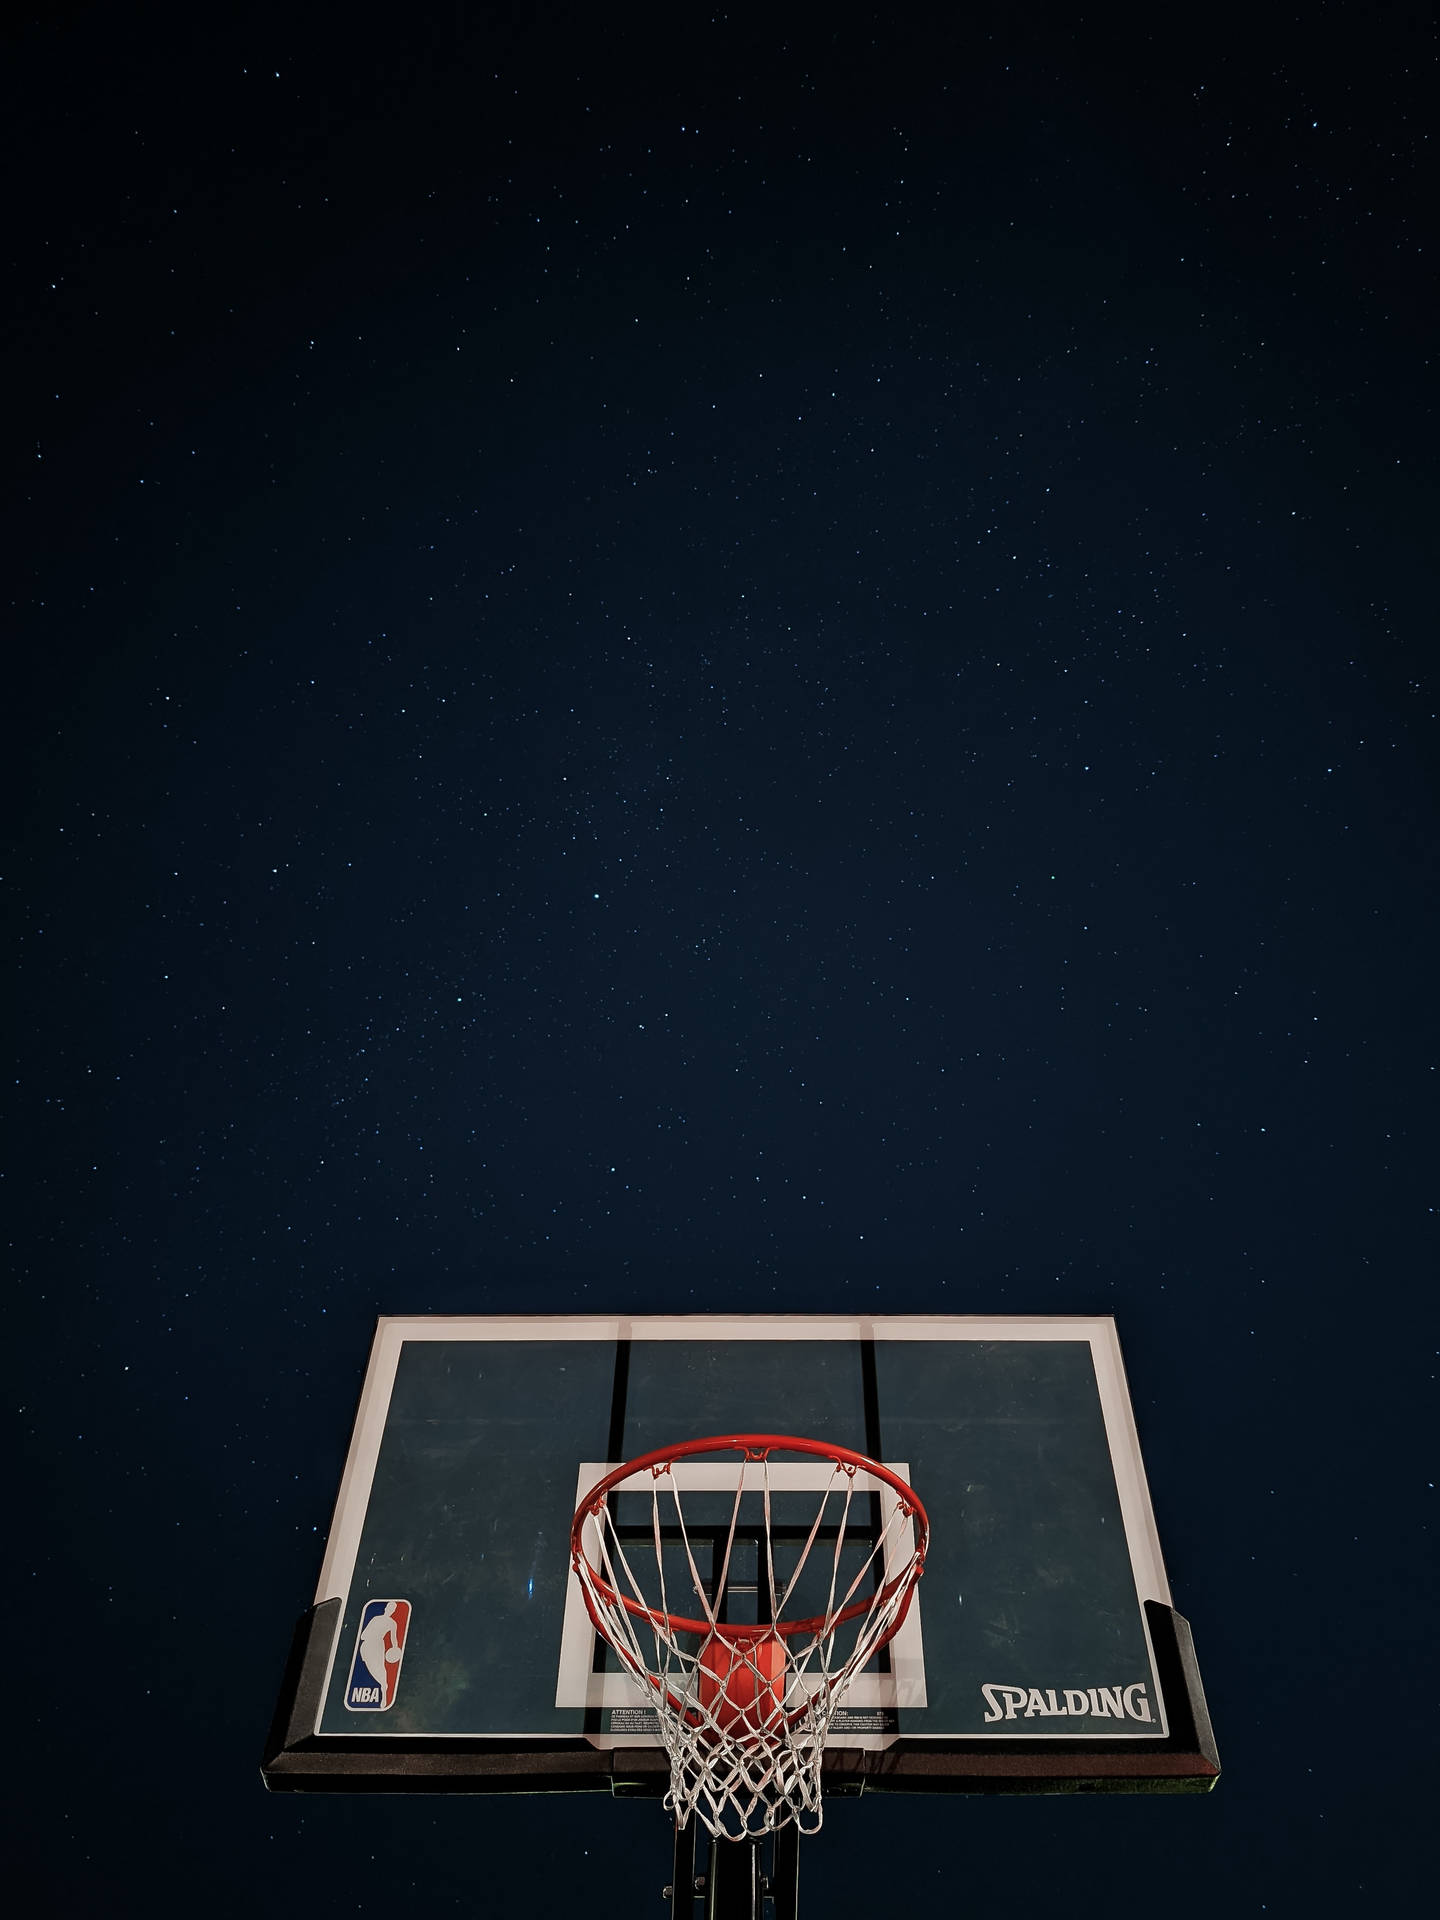 Coolest Iphone Basketball Ring Wallpaper